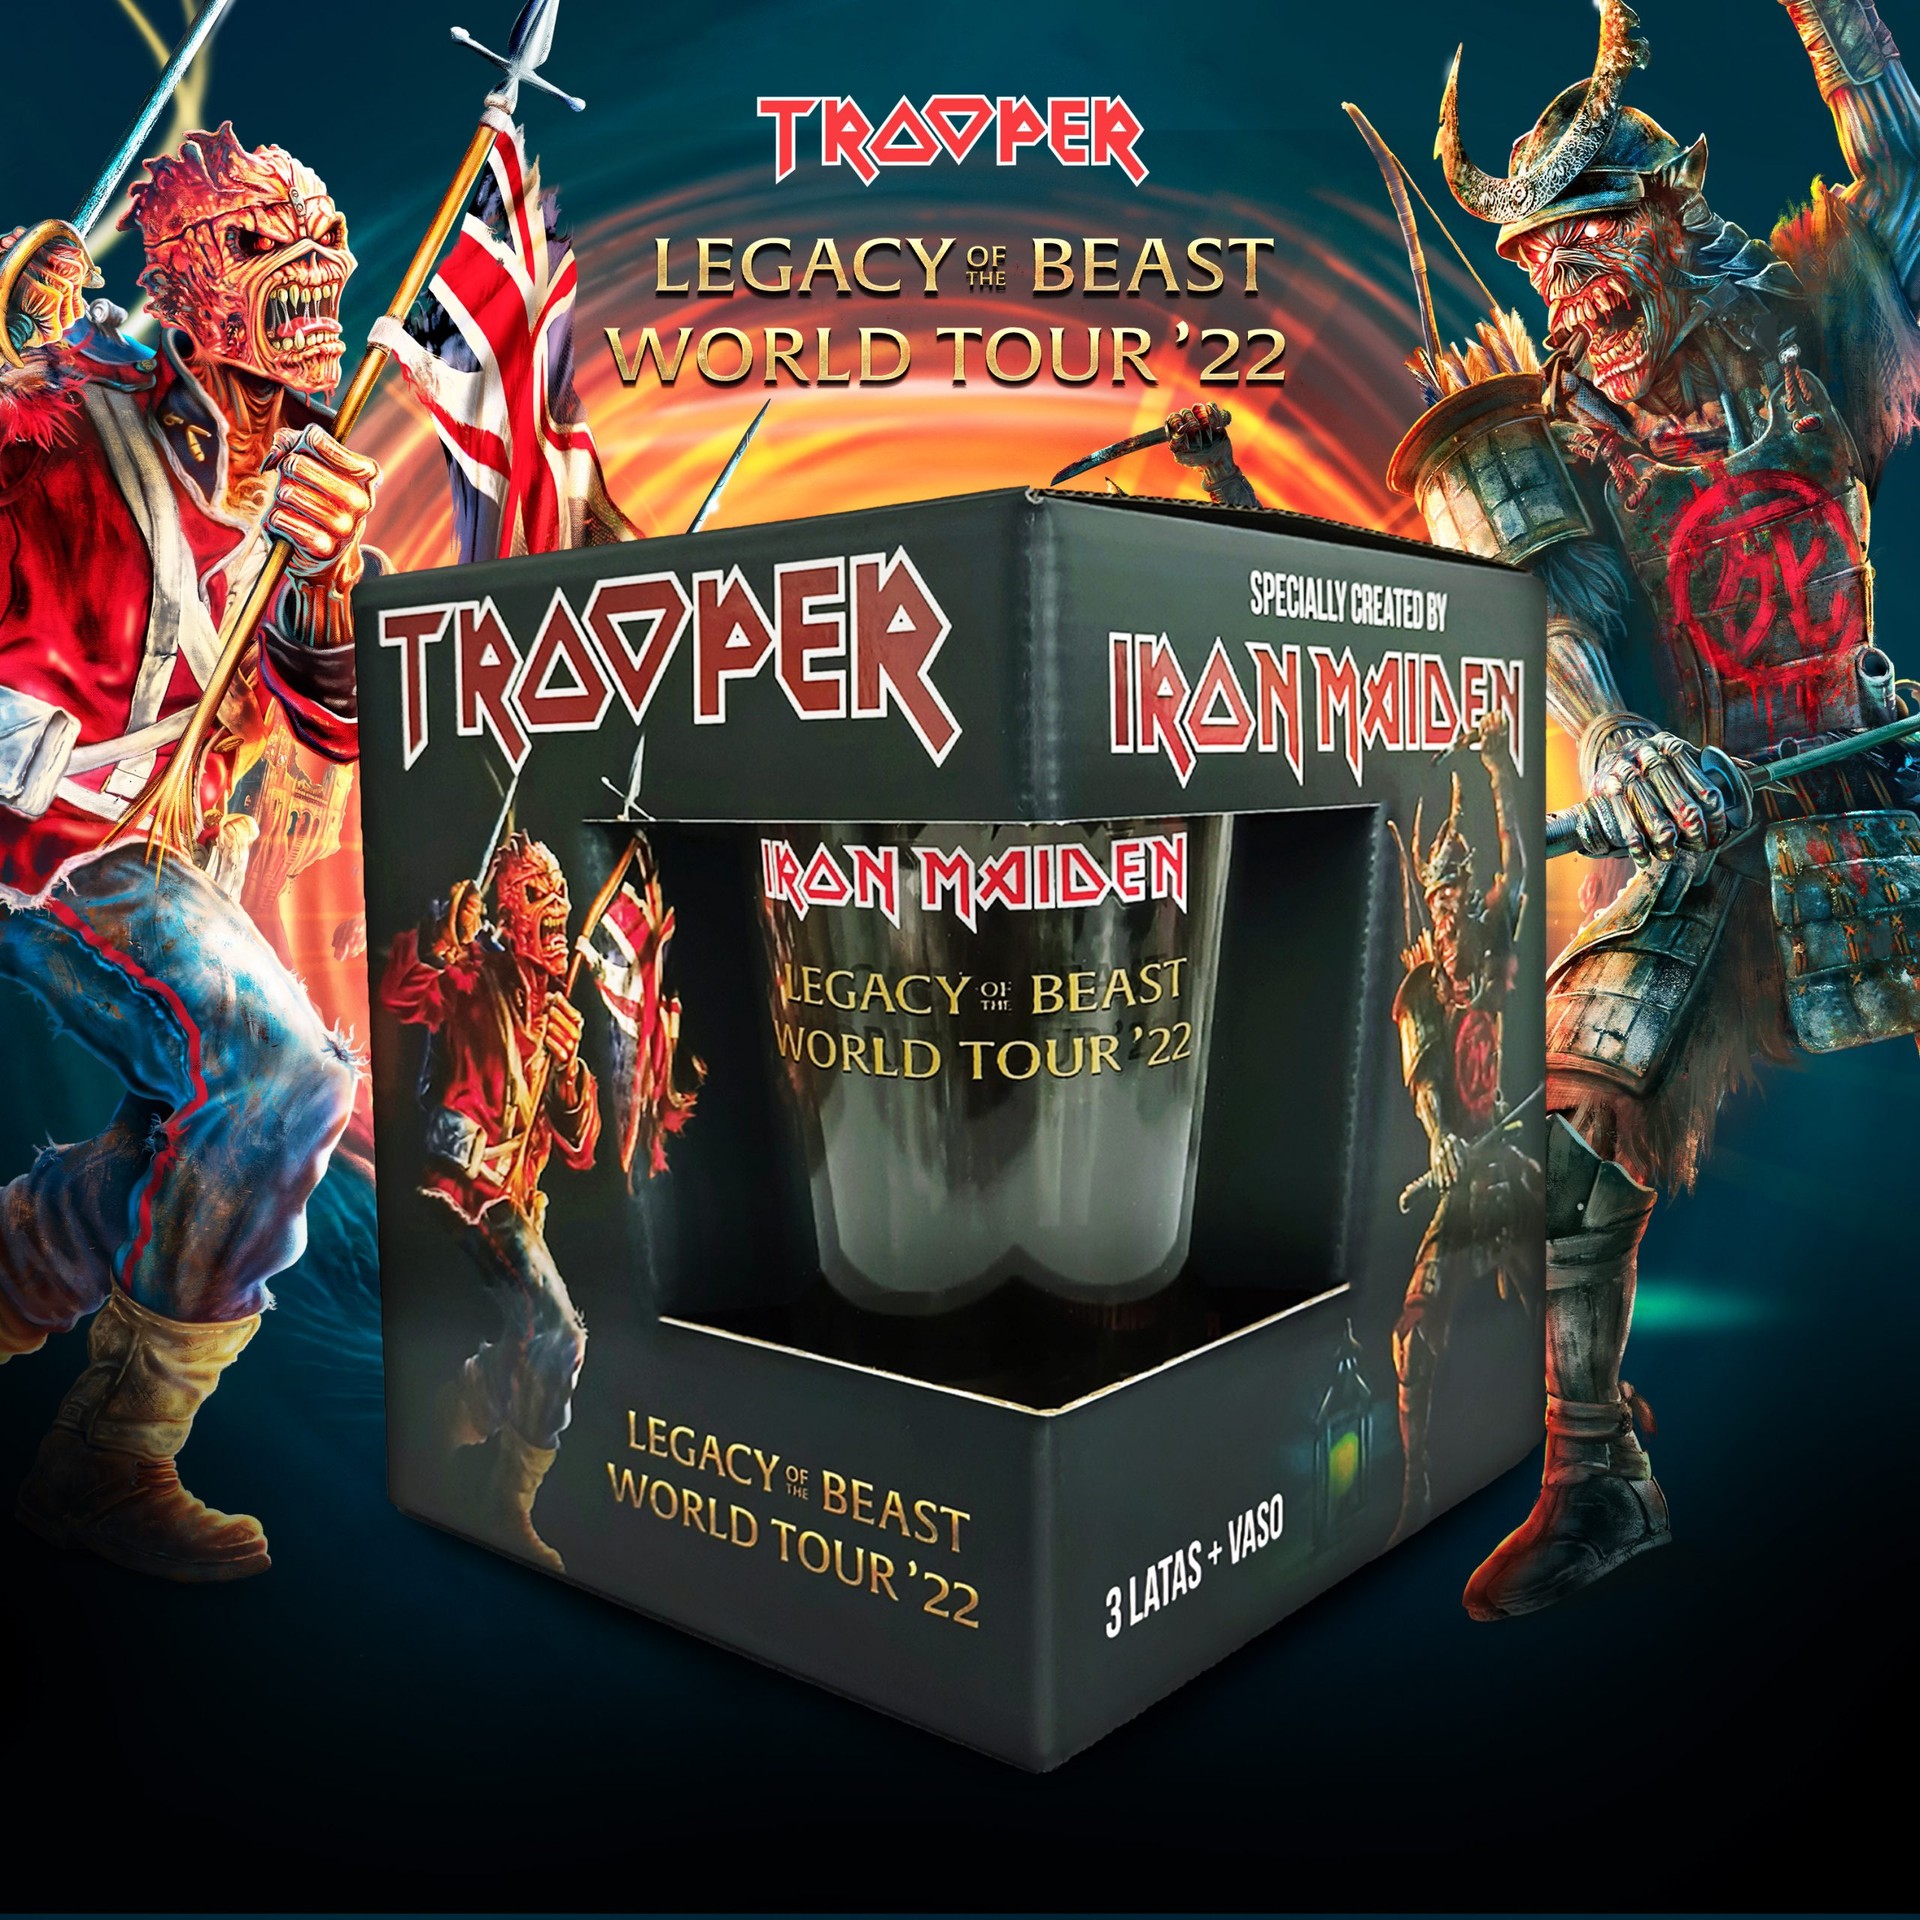 Iron Maiden’s TROOPER Limited-Edition Box